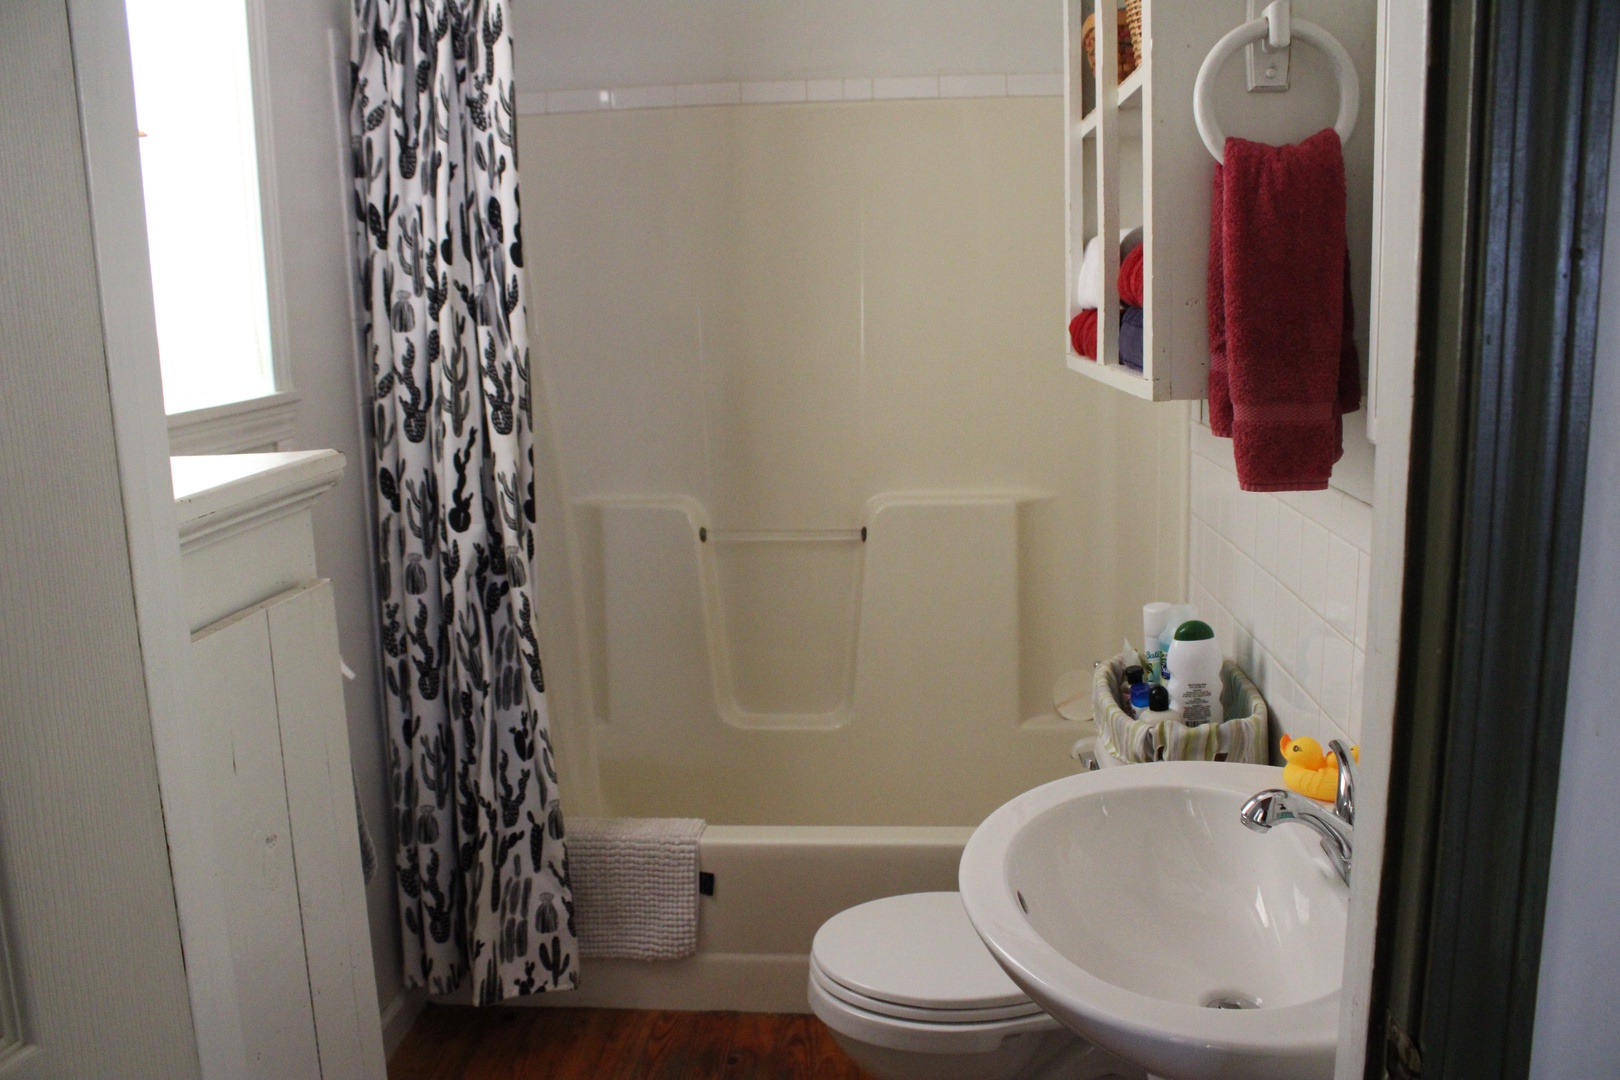 This home’s full bathroom includes a pedestal sink & shower/tub combo